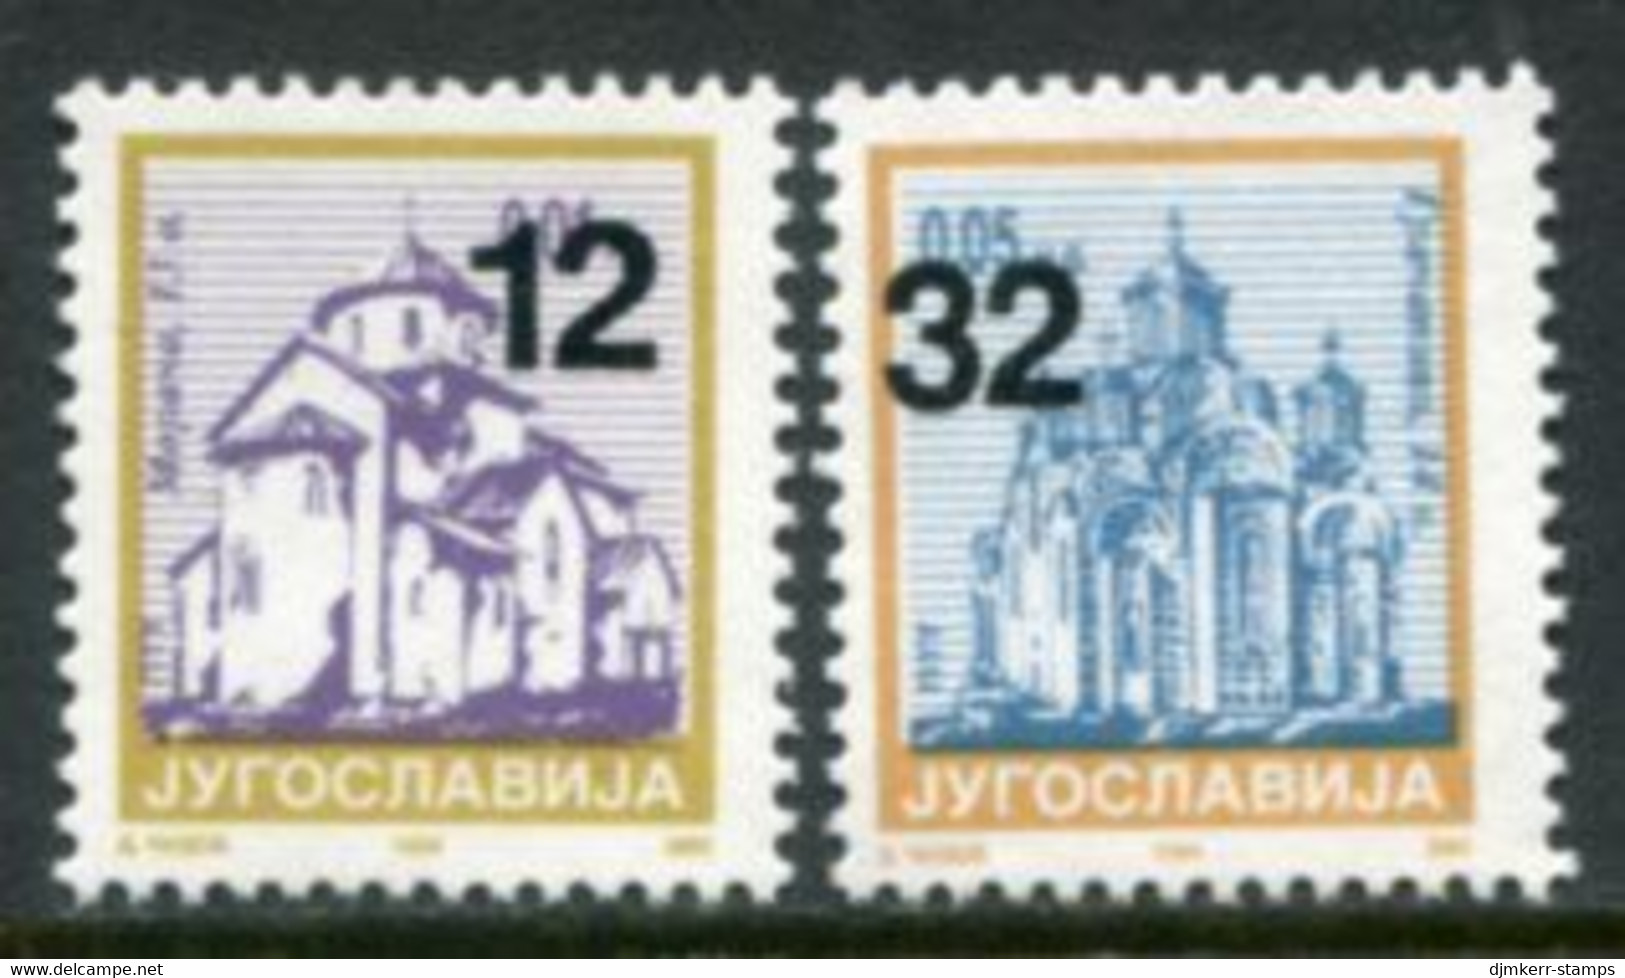 YUGOSLAVIA (Serbia & Montenegro) 2004  Surcharges 12 And 32 ND Perforated 12½  MNH / **  Michel 3212-13C - Nuevos